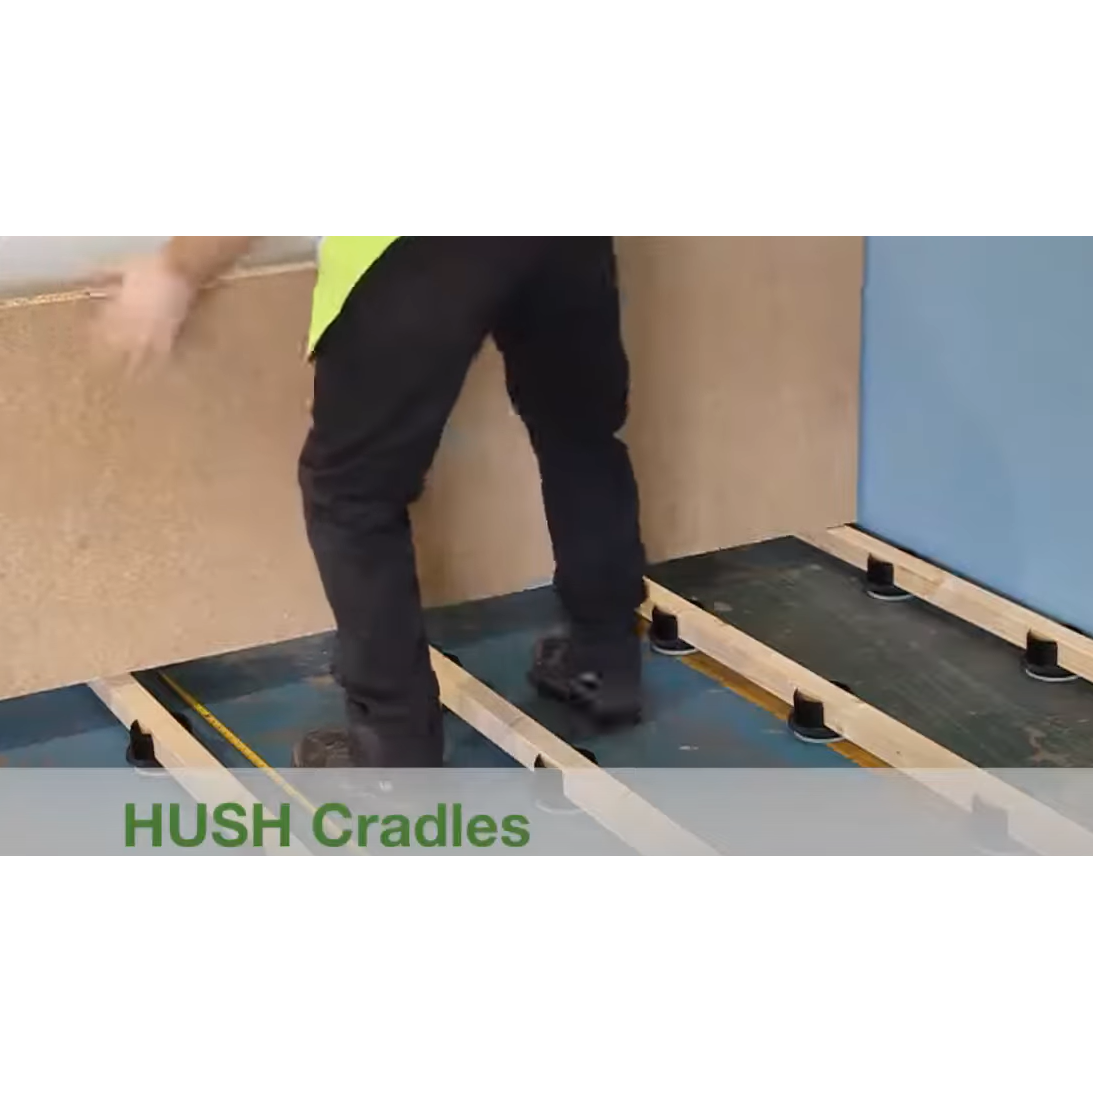 Hush Cradles: adjustable cradle for reducing impact sound in concrete or timber separating floors